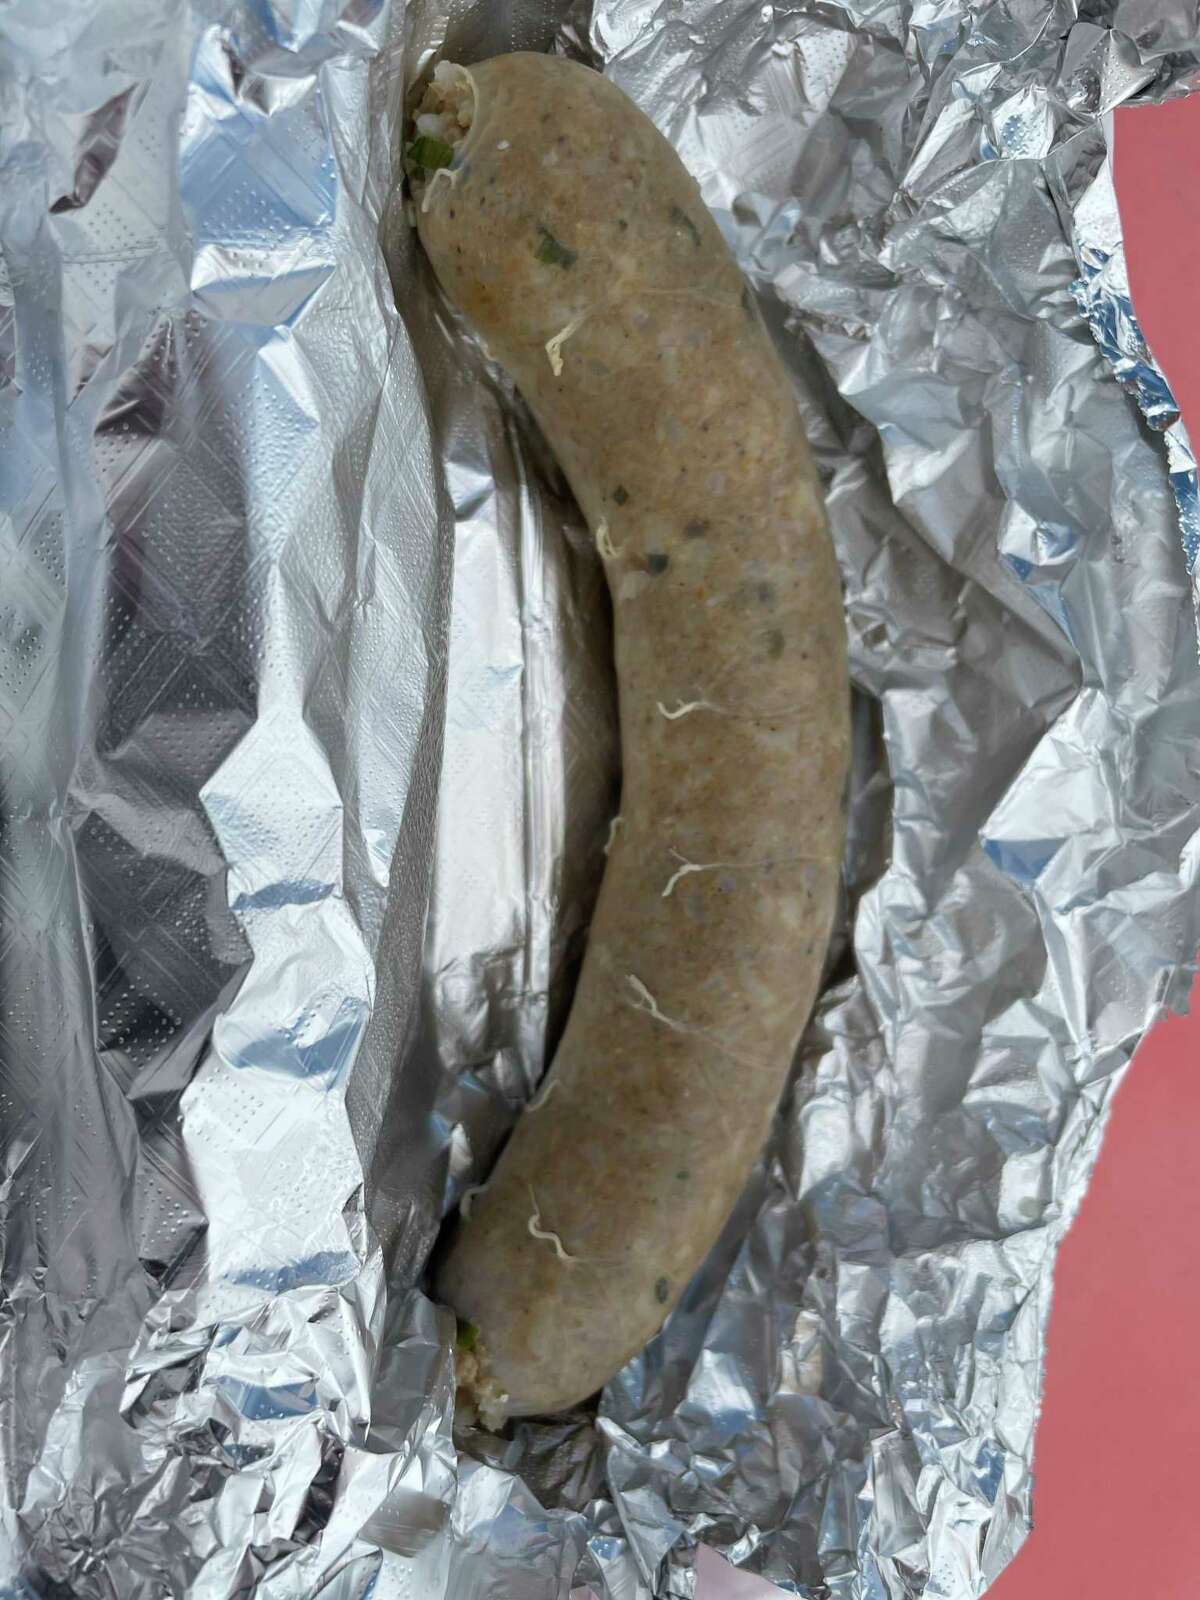 The boudin sausage link at Sauce's Southern Kitchen Cajun & Creole Cuisine is stuffed with a mixture of pork and rice.